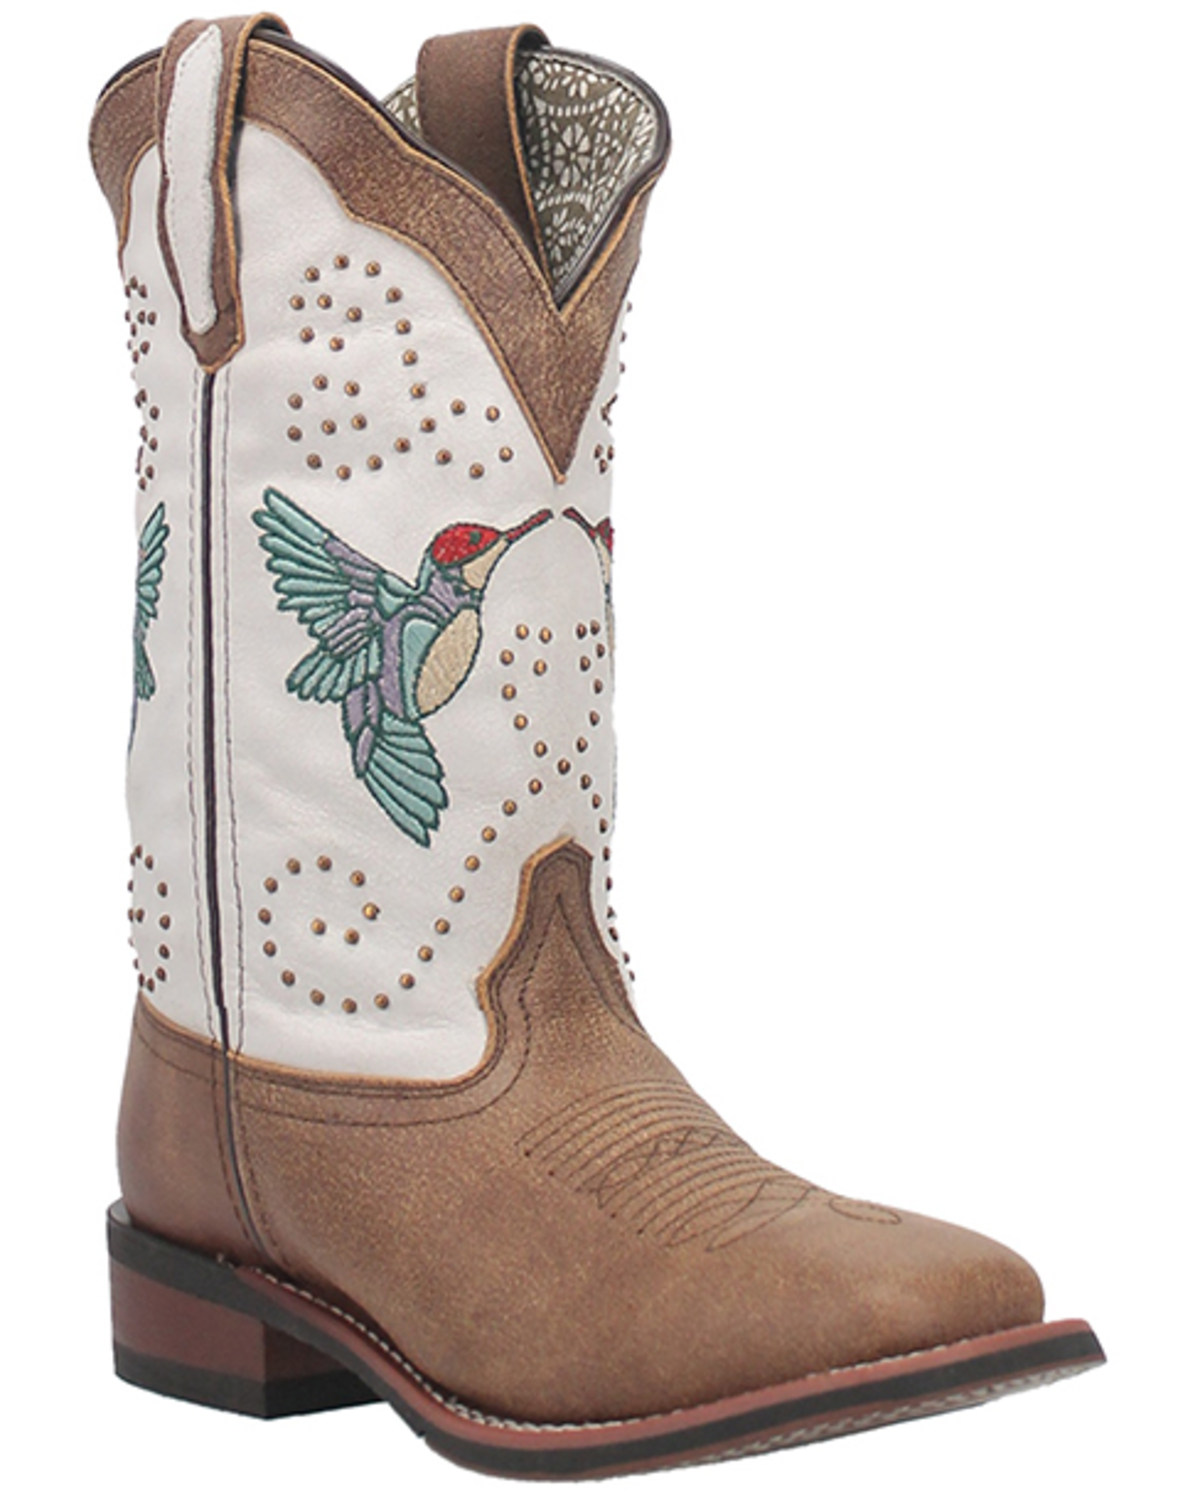 Laredo Women's 11" Hummingbird Embroidered Studded Western Performance Boots - Broad Square Toe